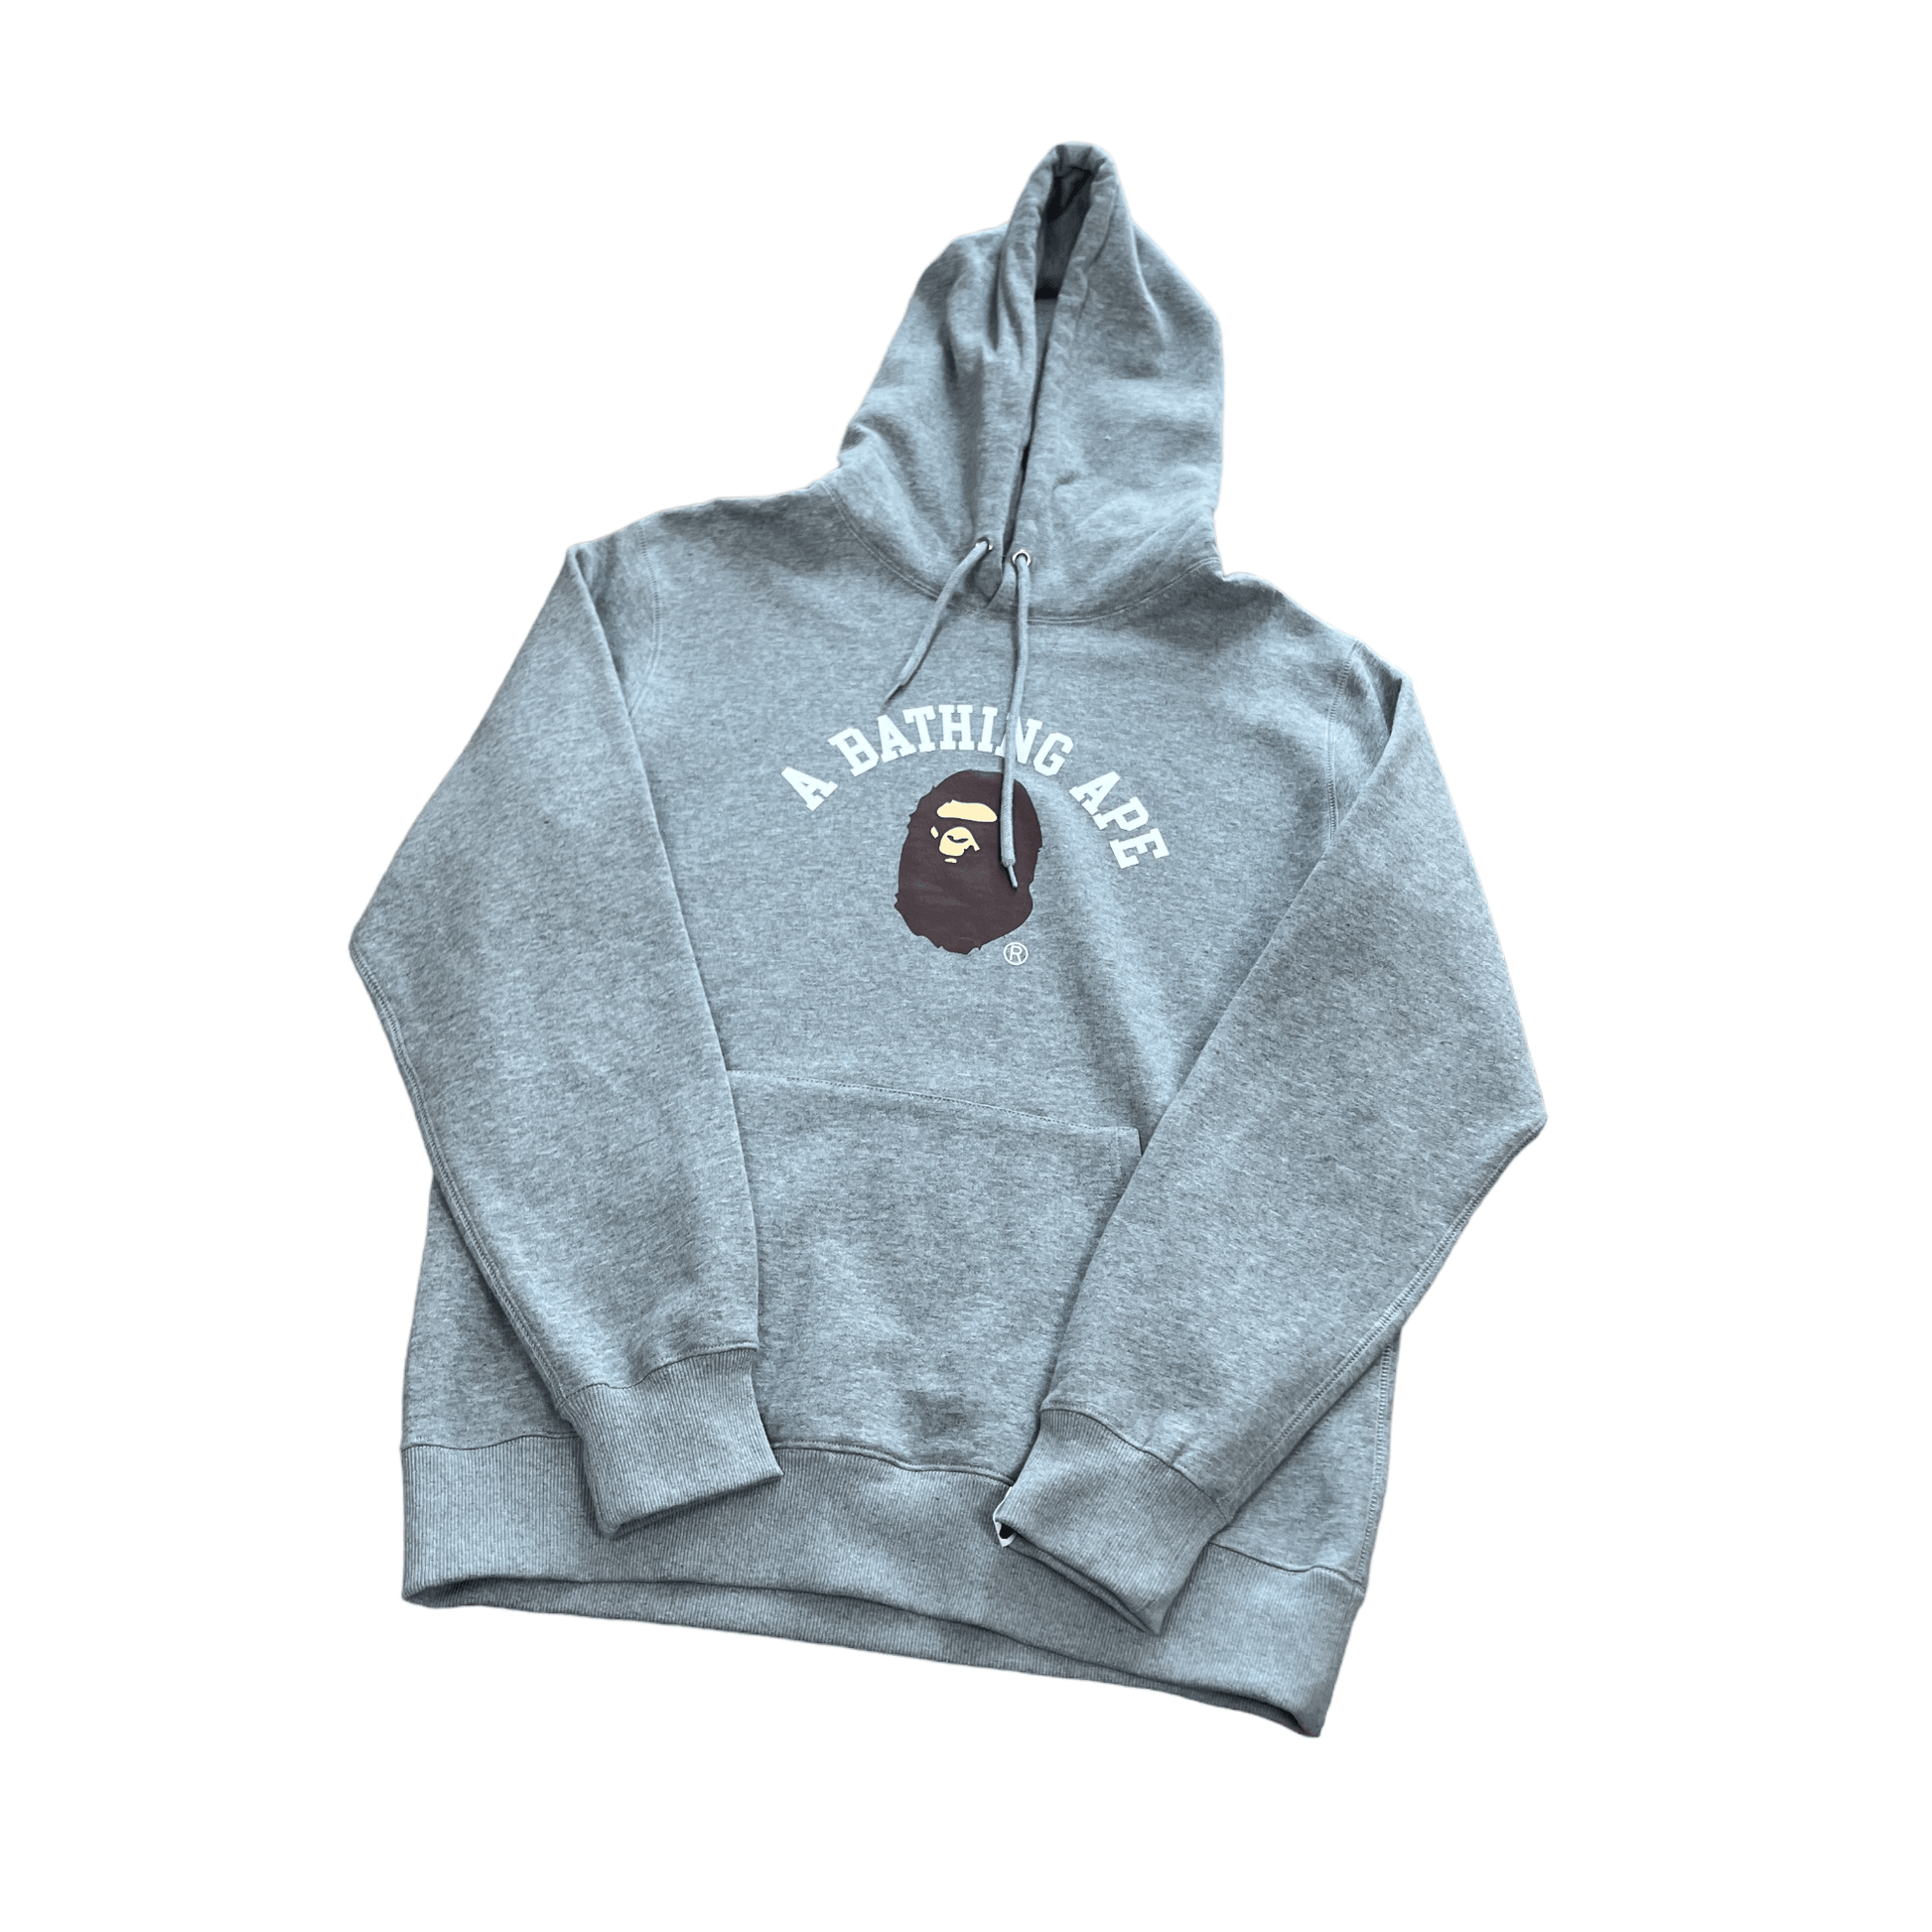 Grey A Bathing Ape (BAPE) Hoodie - Recommended Size - Extra Large - The Streetwear Studio